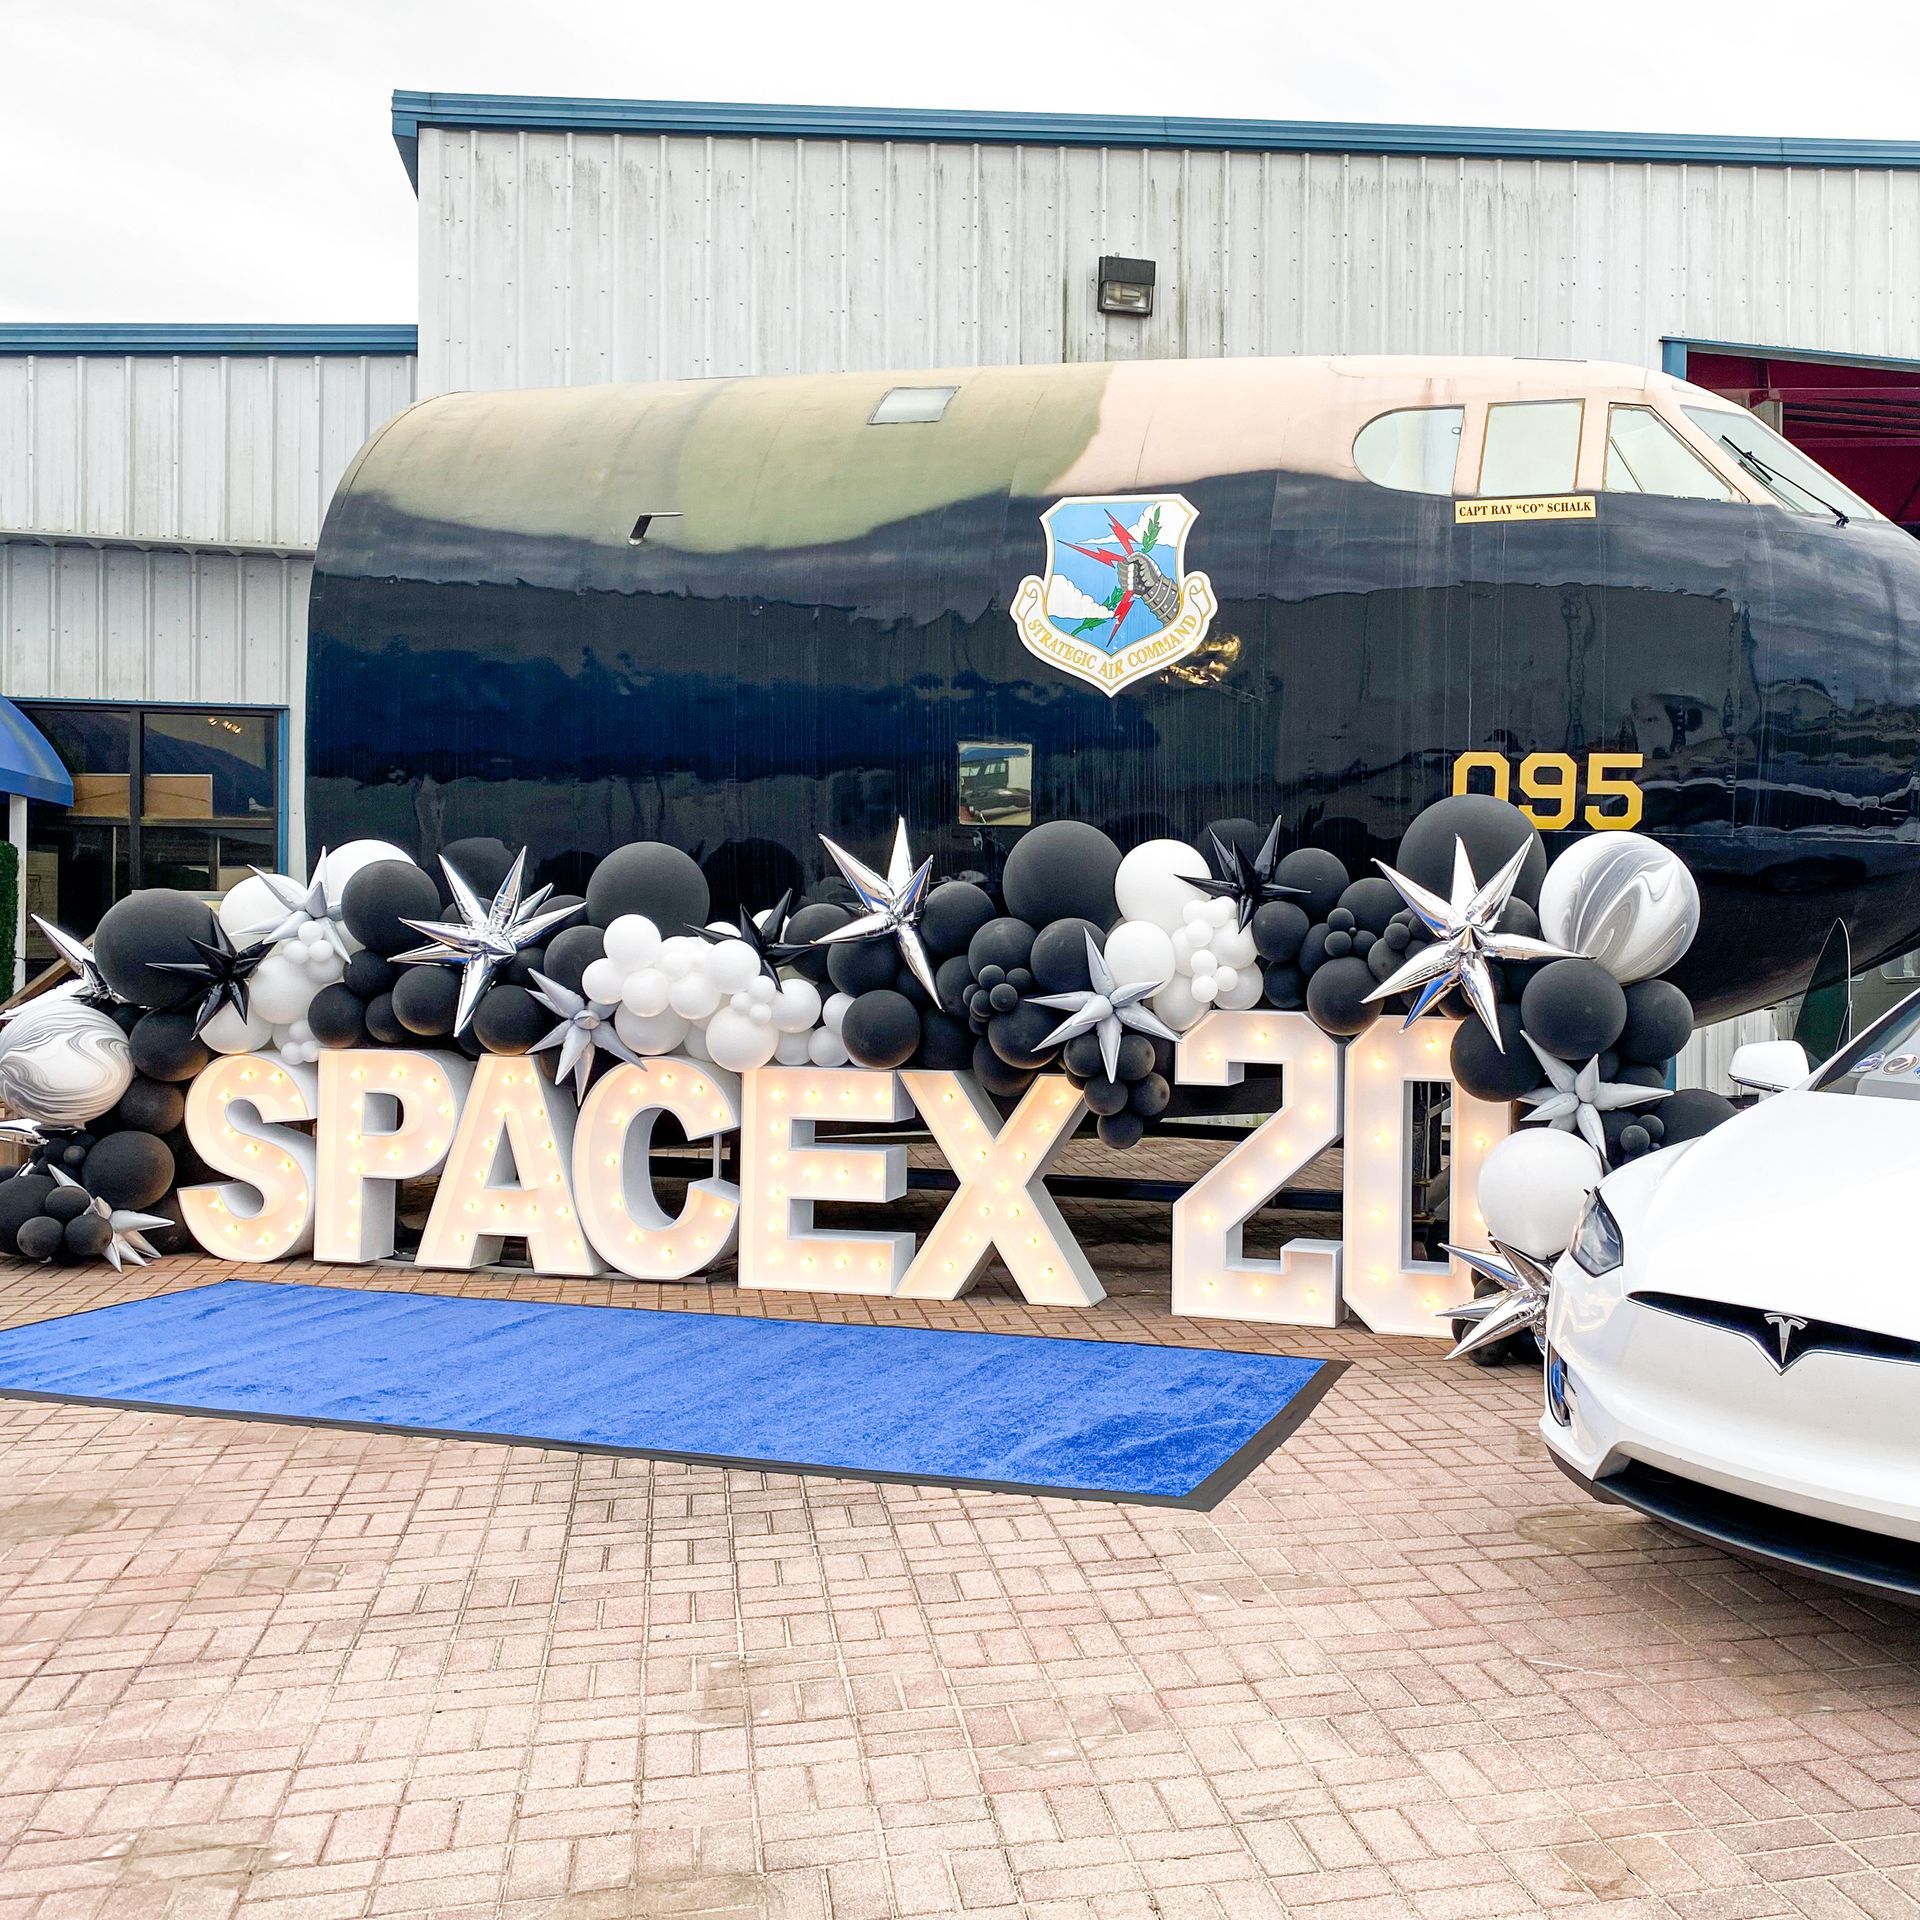 A plane is decorated with balloons and a sign that says spacex 21